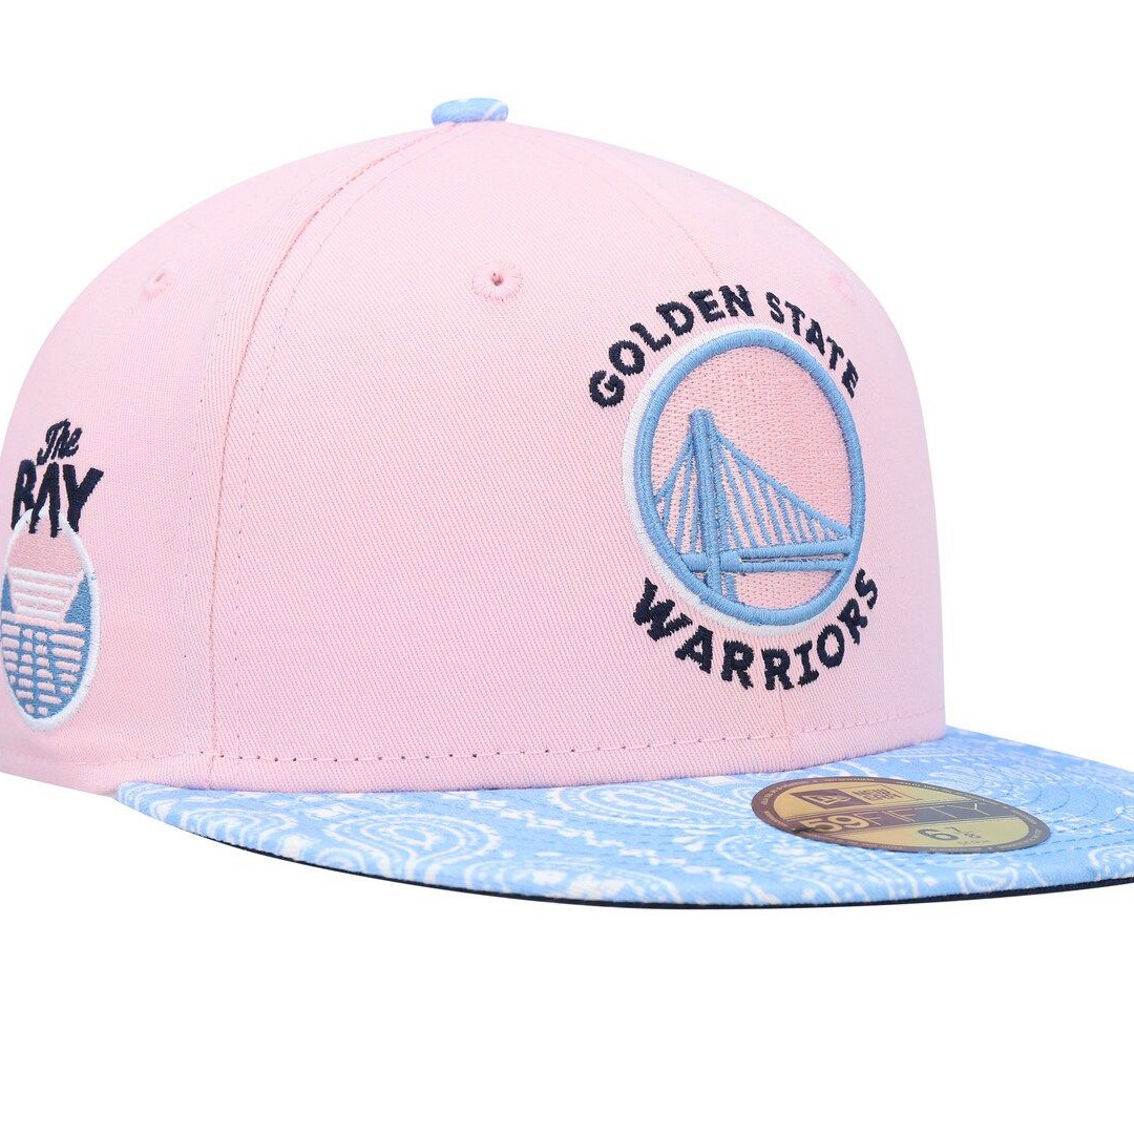 New Era Men's Pink/Light Blue Golden State Warriors Paisley Visor 59FIFTY Fitted Hat - Image 2 of 4